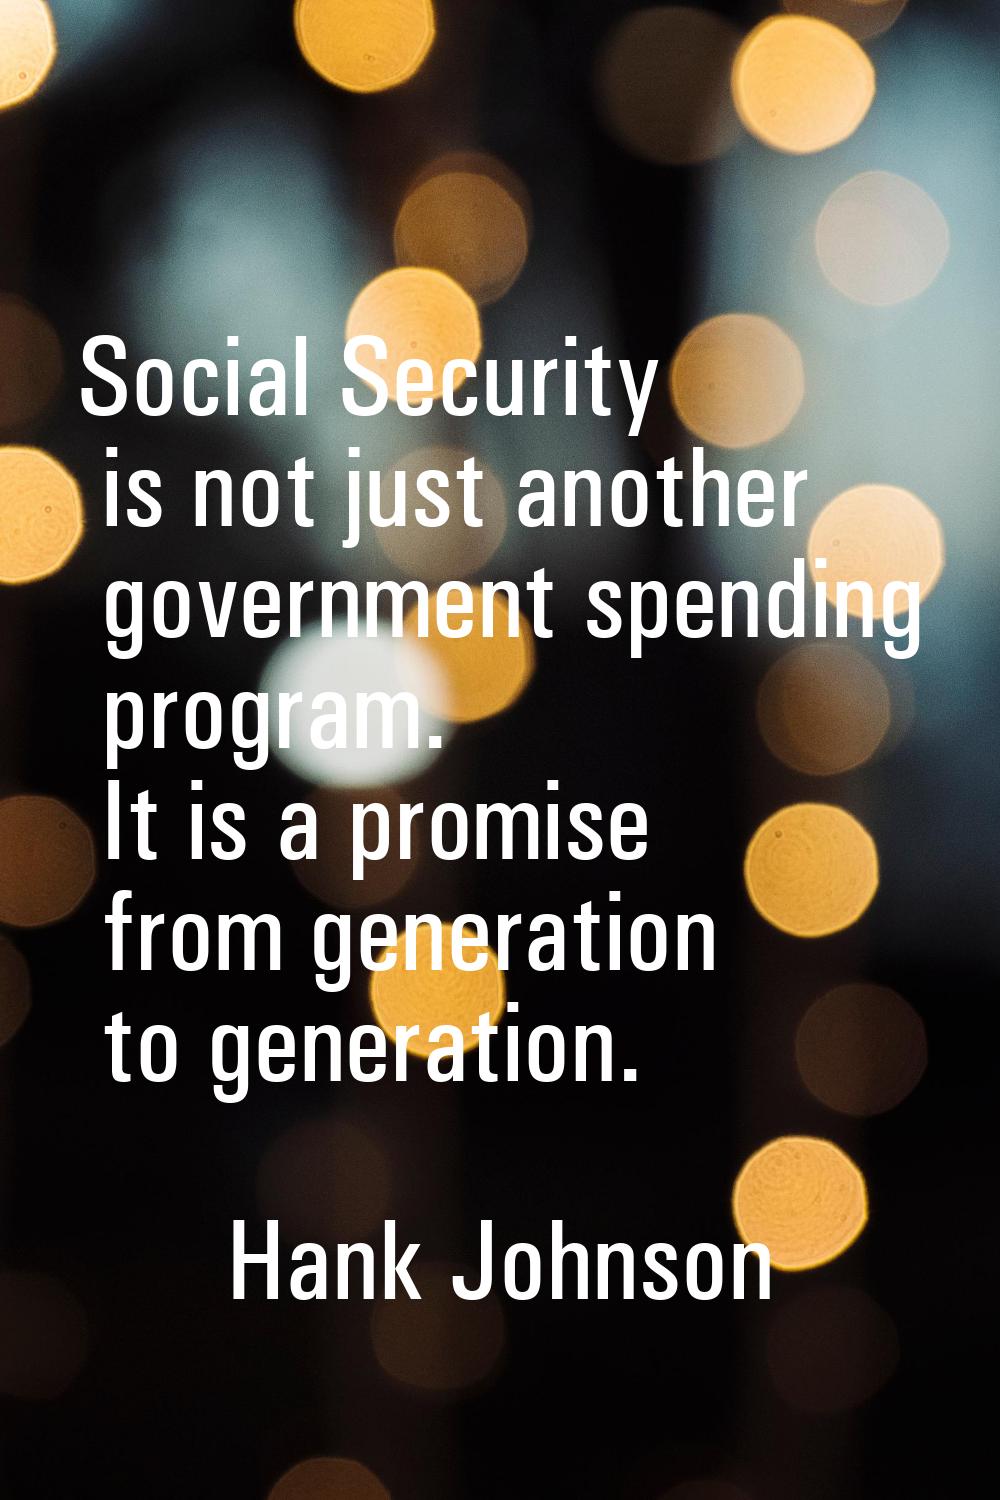 Social Security is not just another government spending program. It is a promise from generation to